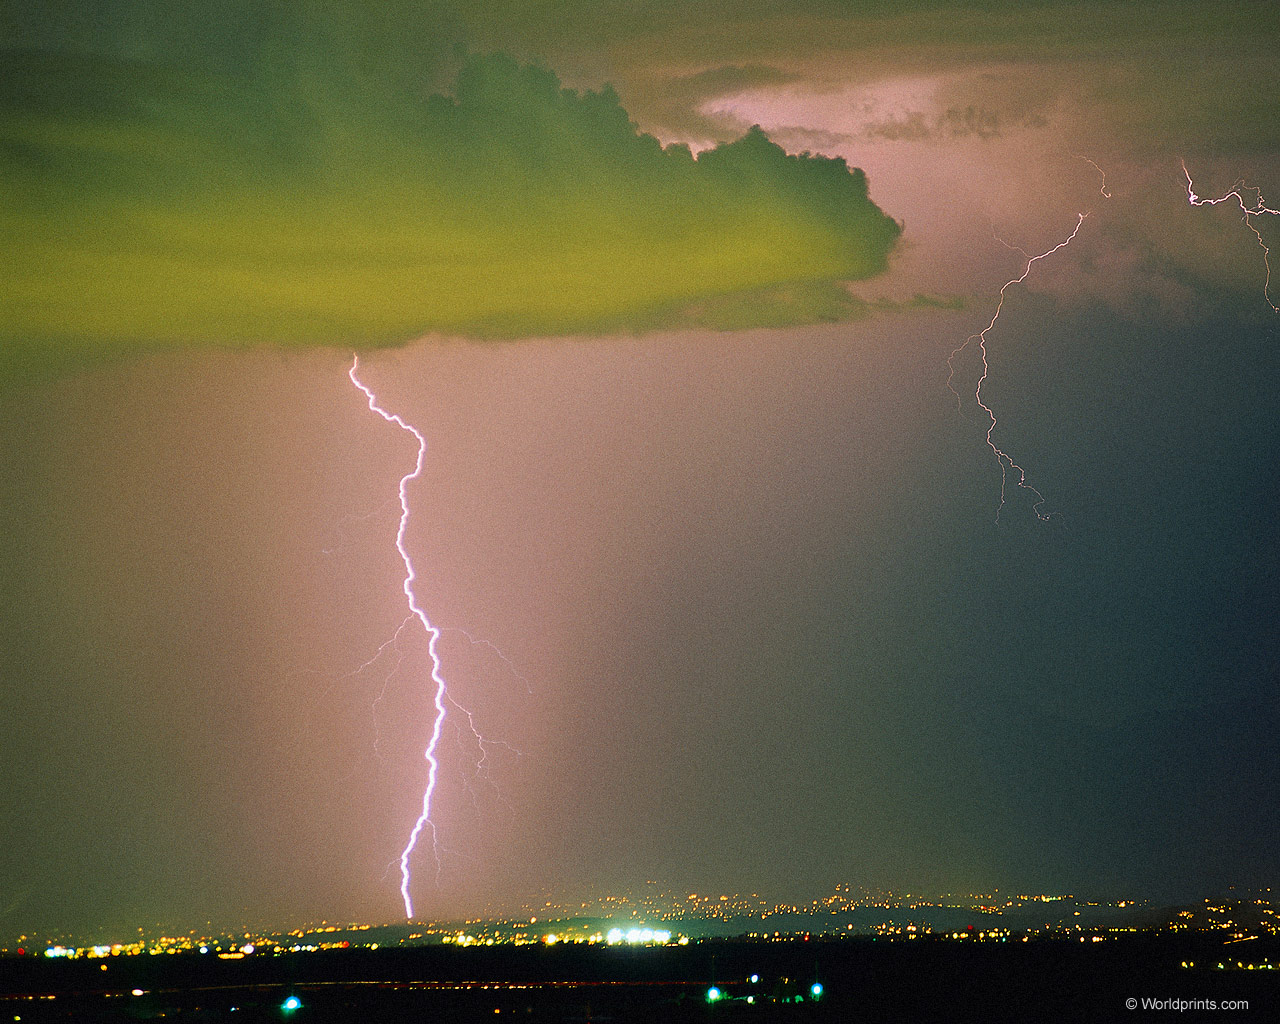 Download High quality Lightnings wallpaper / Nature / 1280x1024